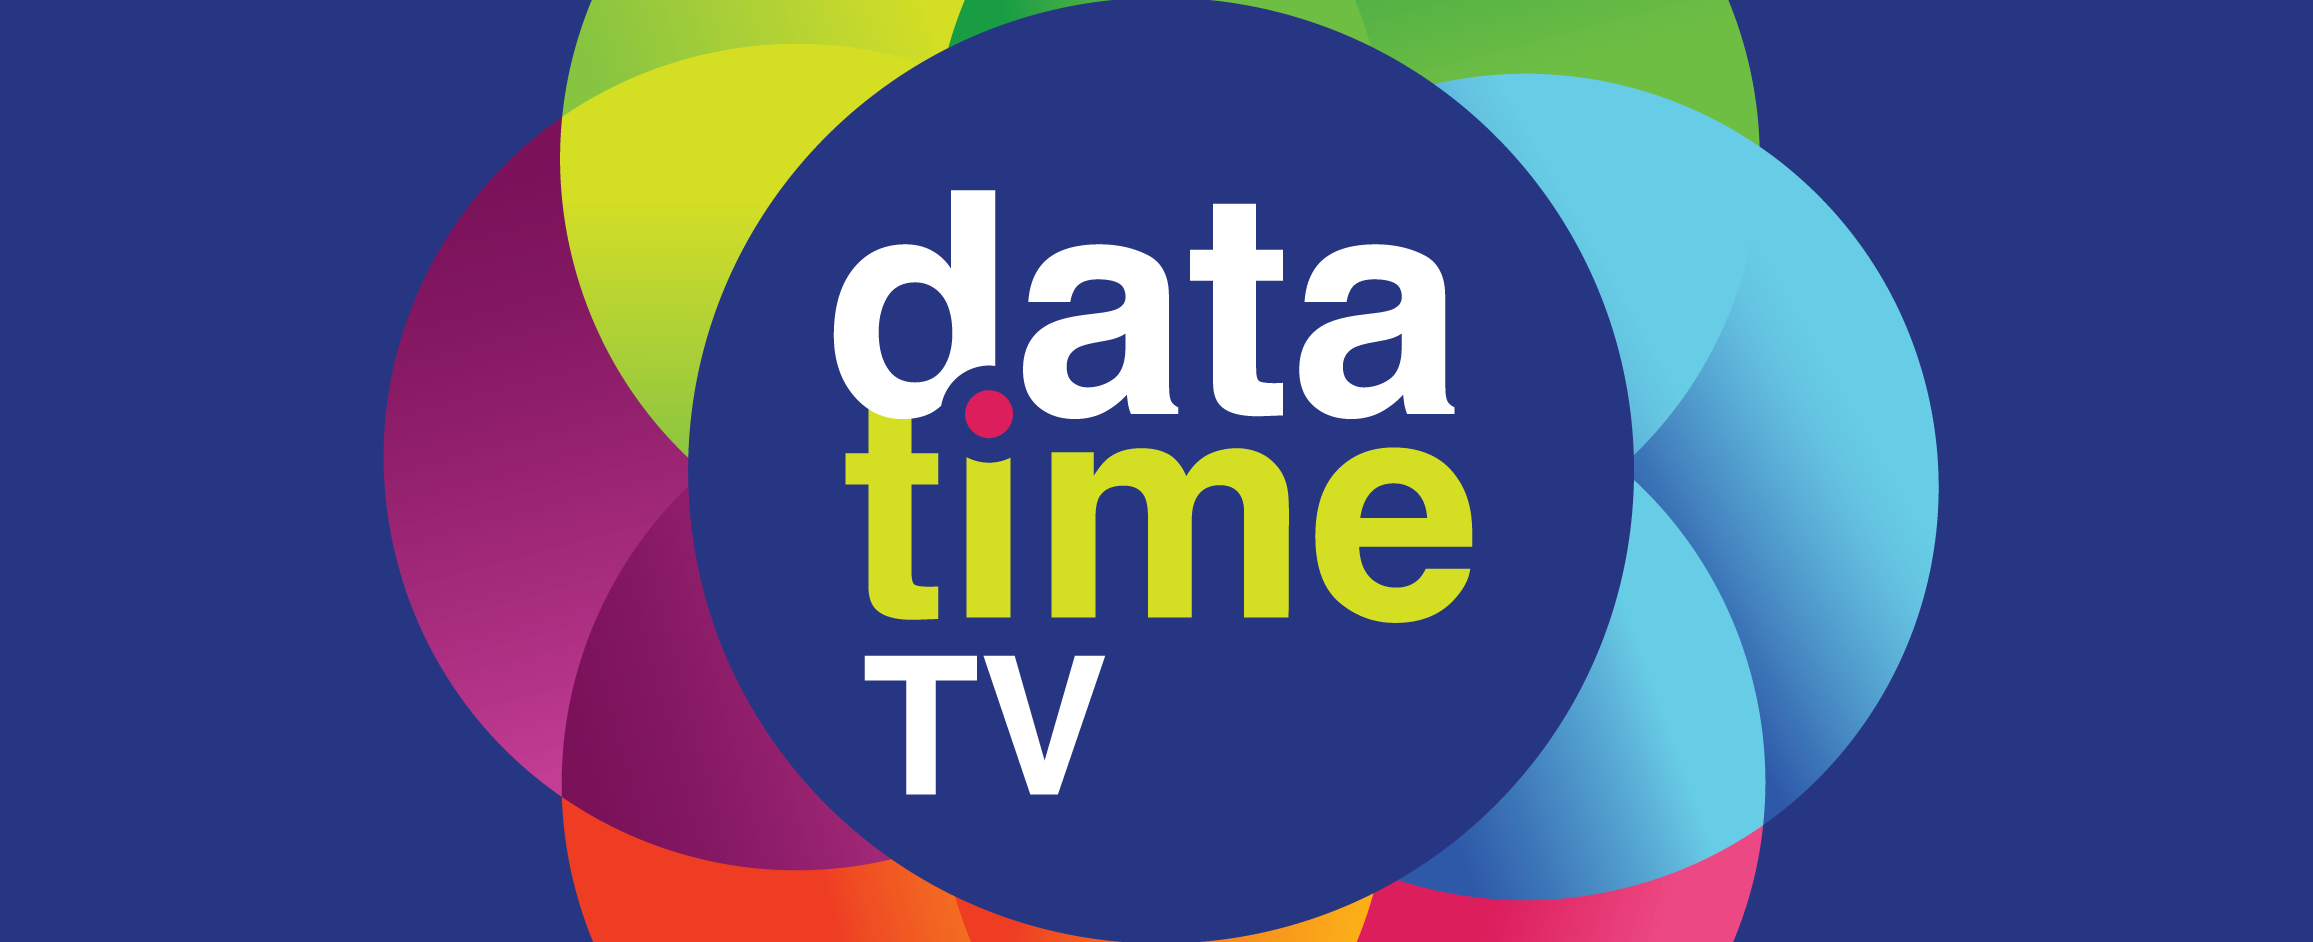 Dark blue rectangle with rainbow overlapping circles in the middle in the shape of a flower. In the middle of the flower there is a dark blue circle and the words 'data time TV' in the middle.